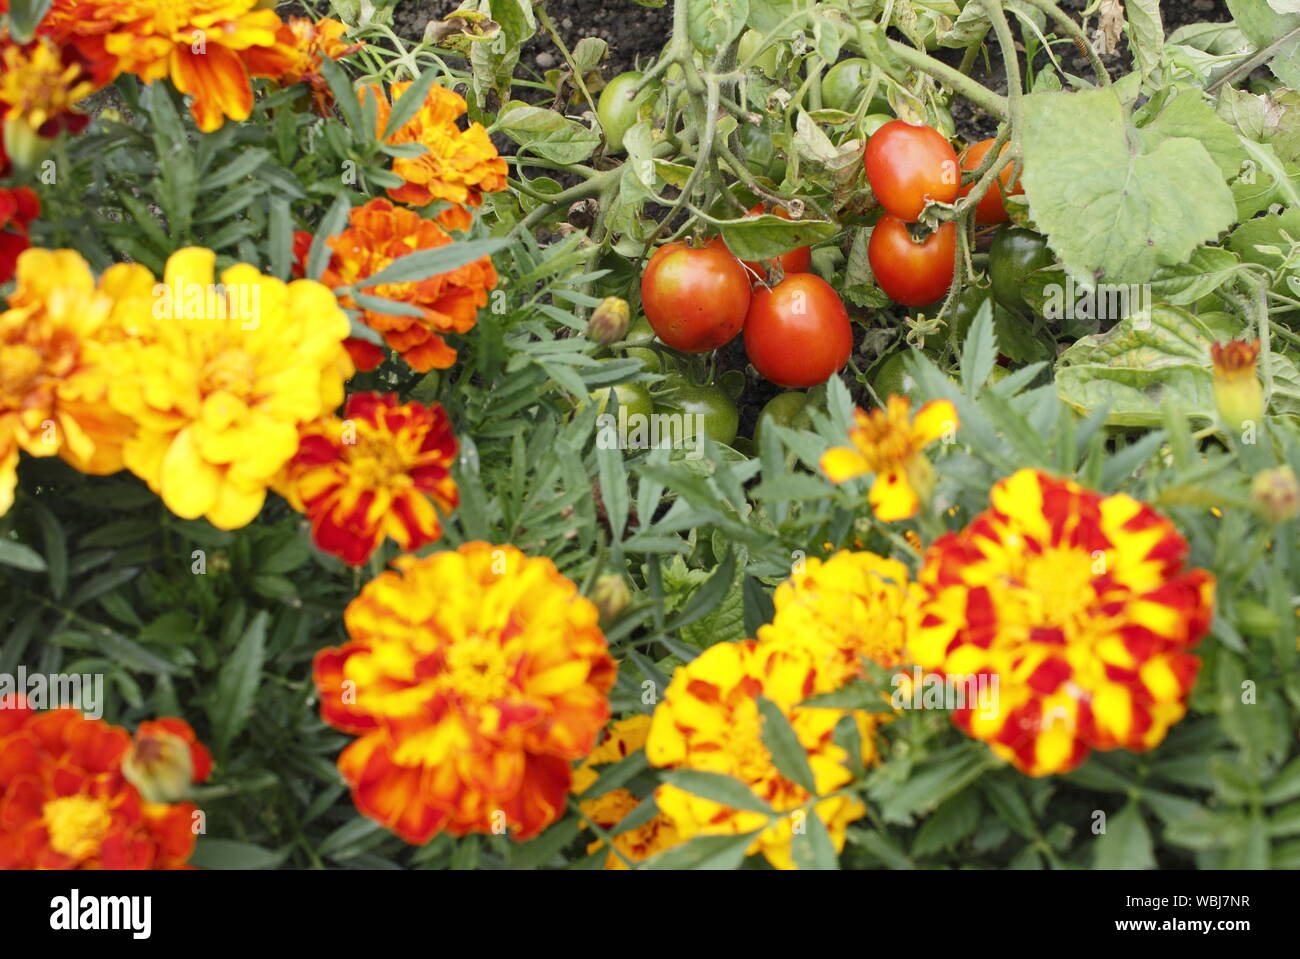 Solanum lycopersicum 'Outdoor Girl' and Tagetes patula. Companion planting of tomatoes and French marigolds to help deter tomato pests. UK Stock Photo